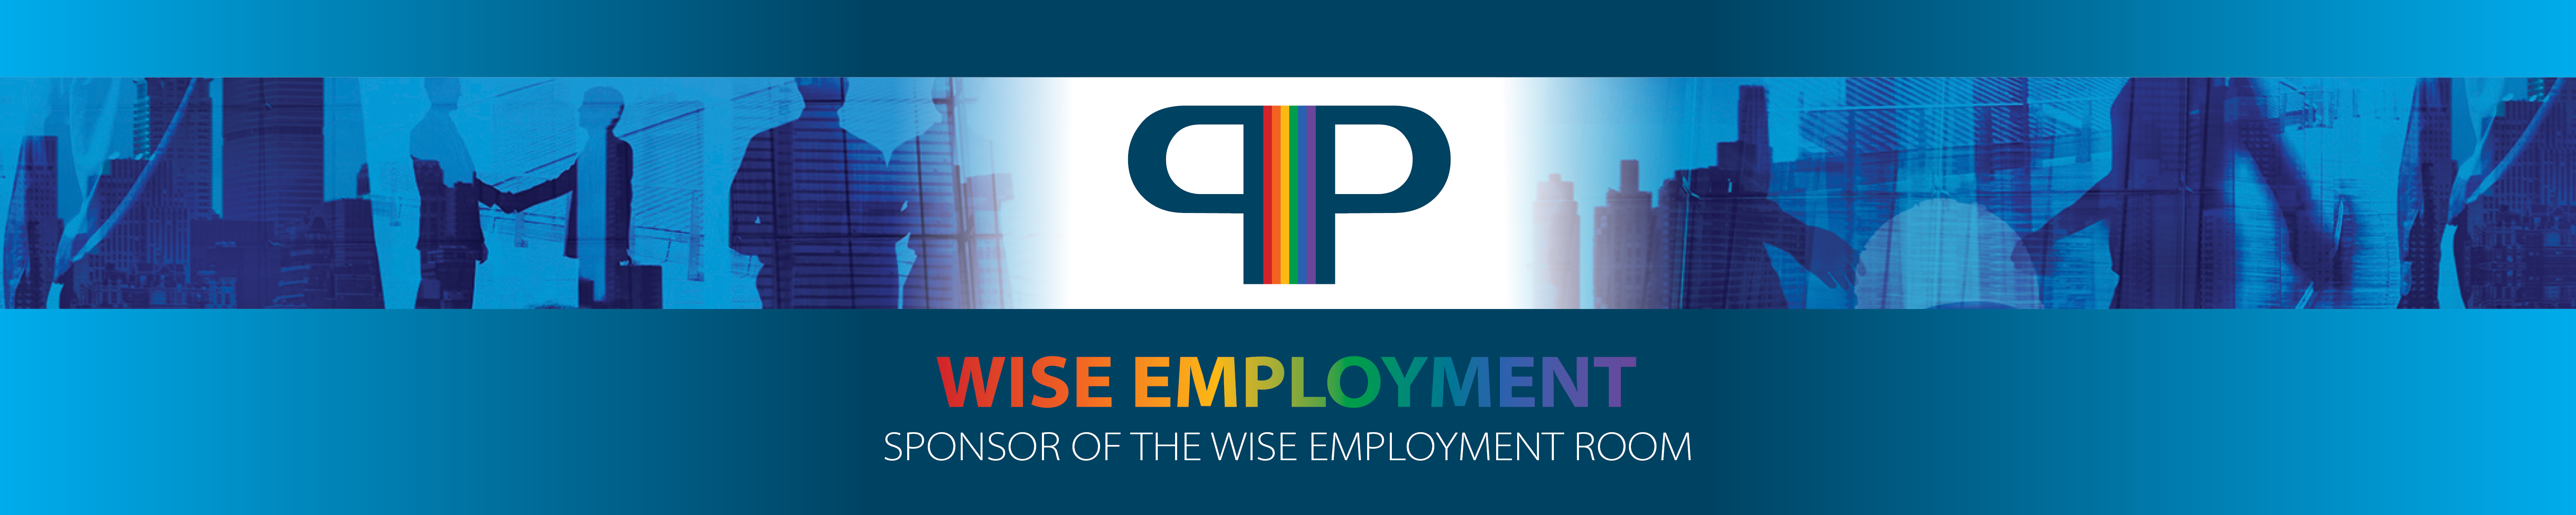 PIP_Conference_Sponsor_WiseEmployment